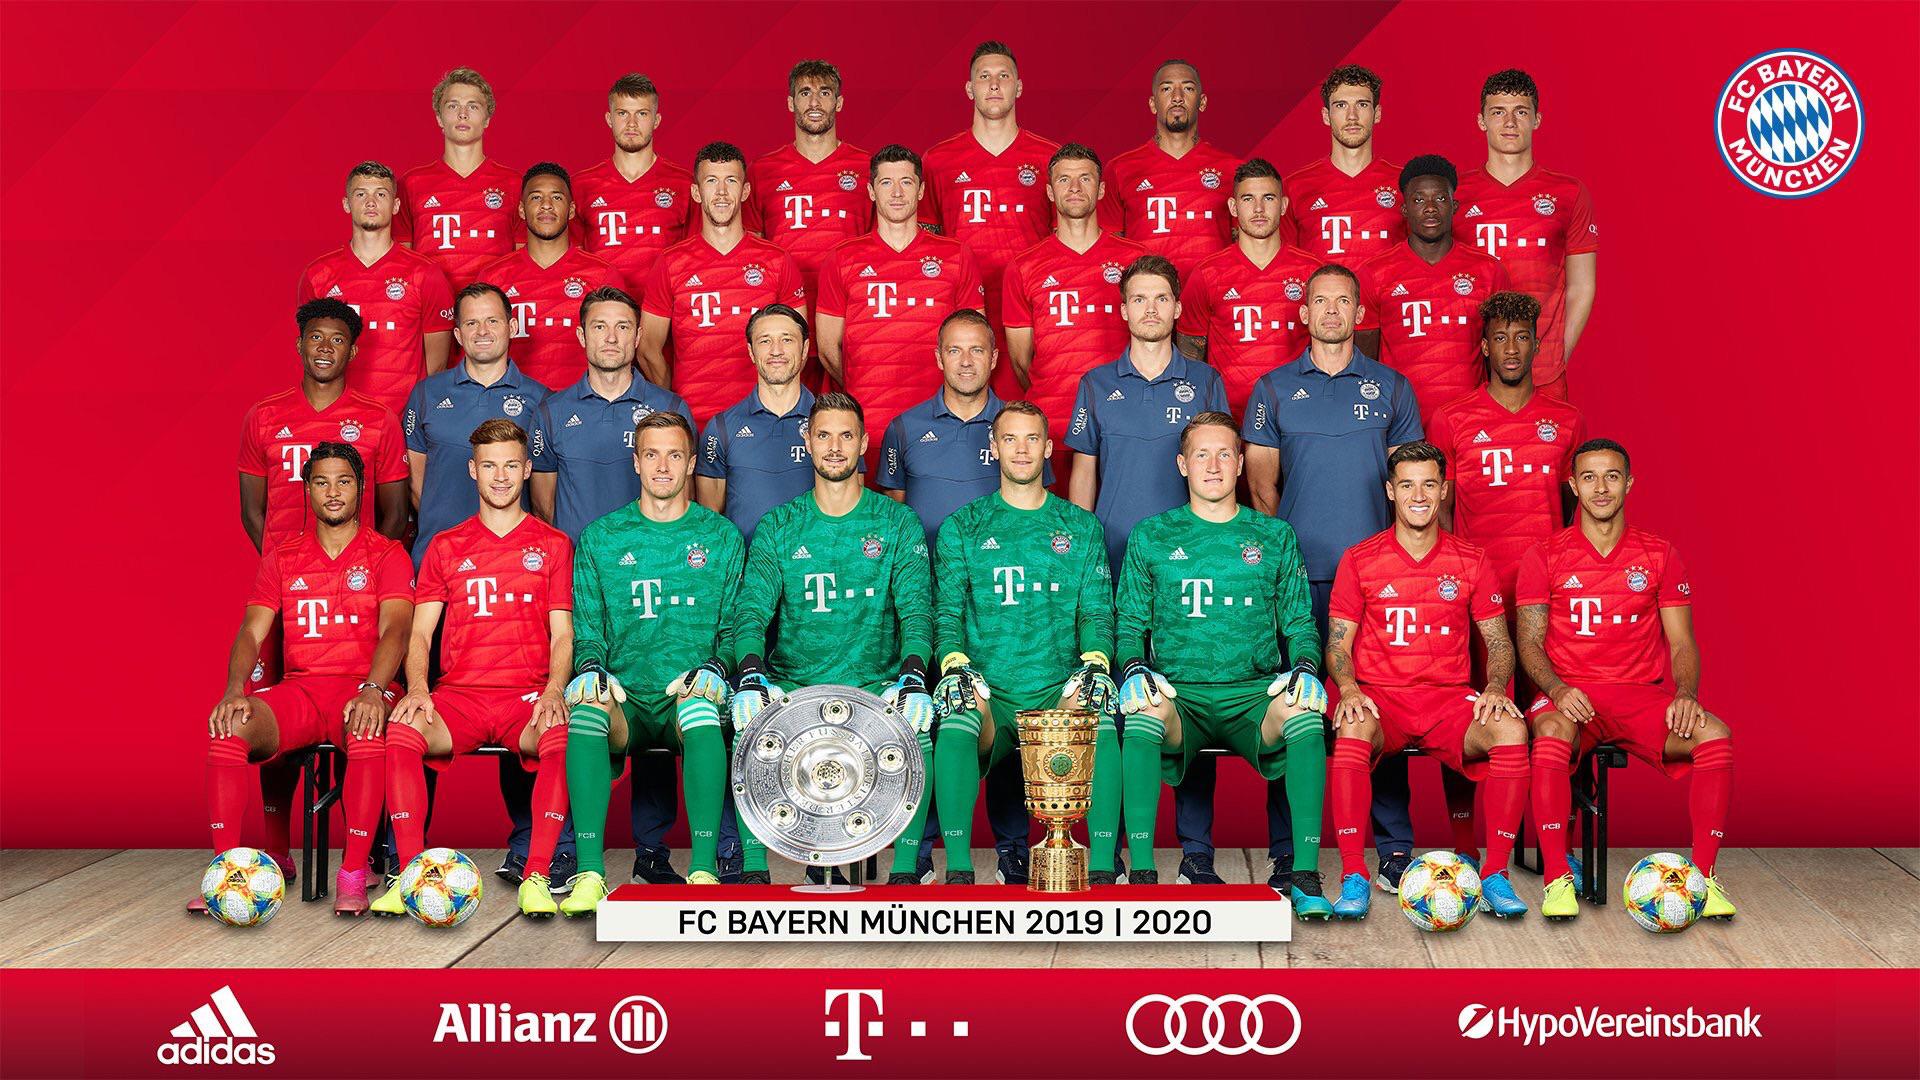 FC Bayern's 2019 20 Official Team Photo